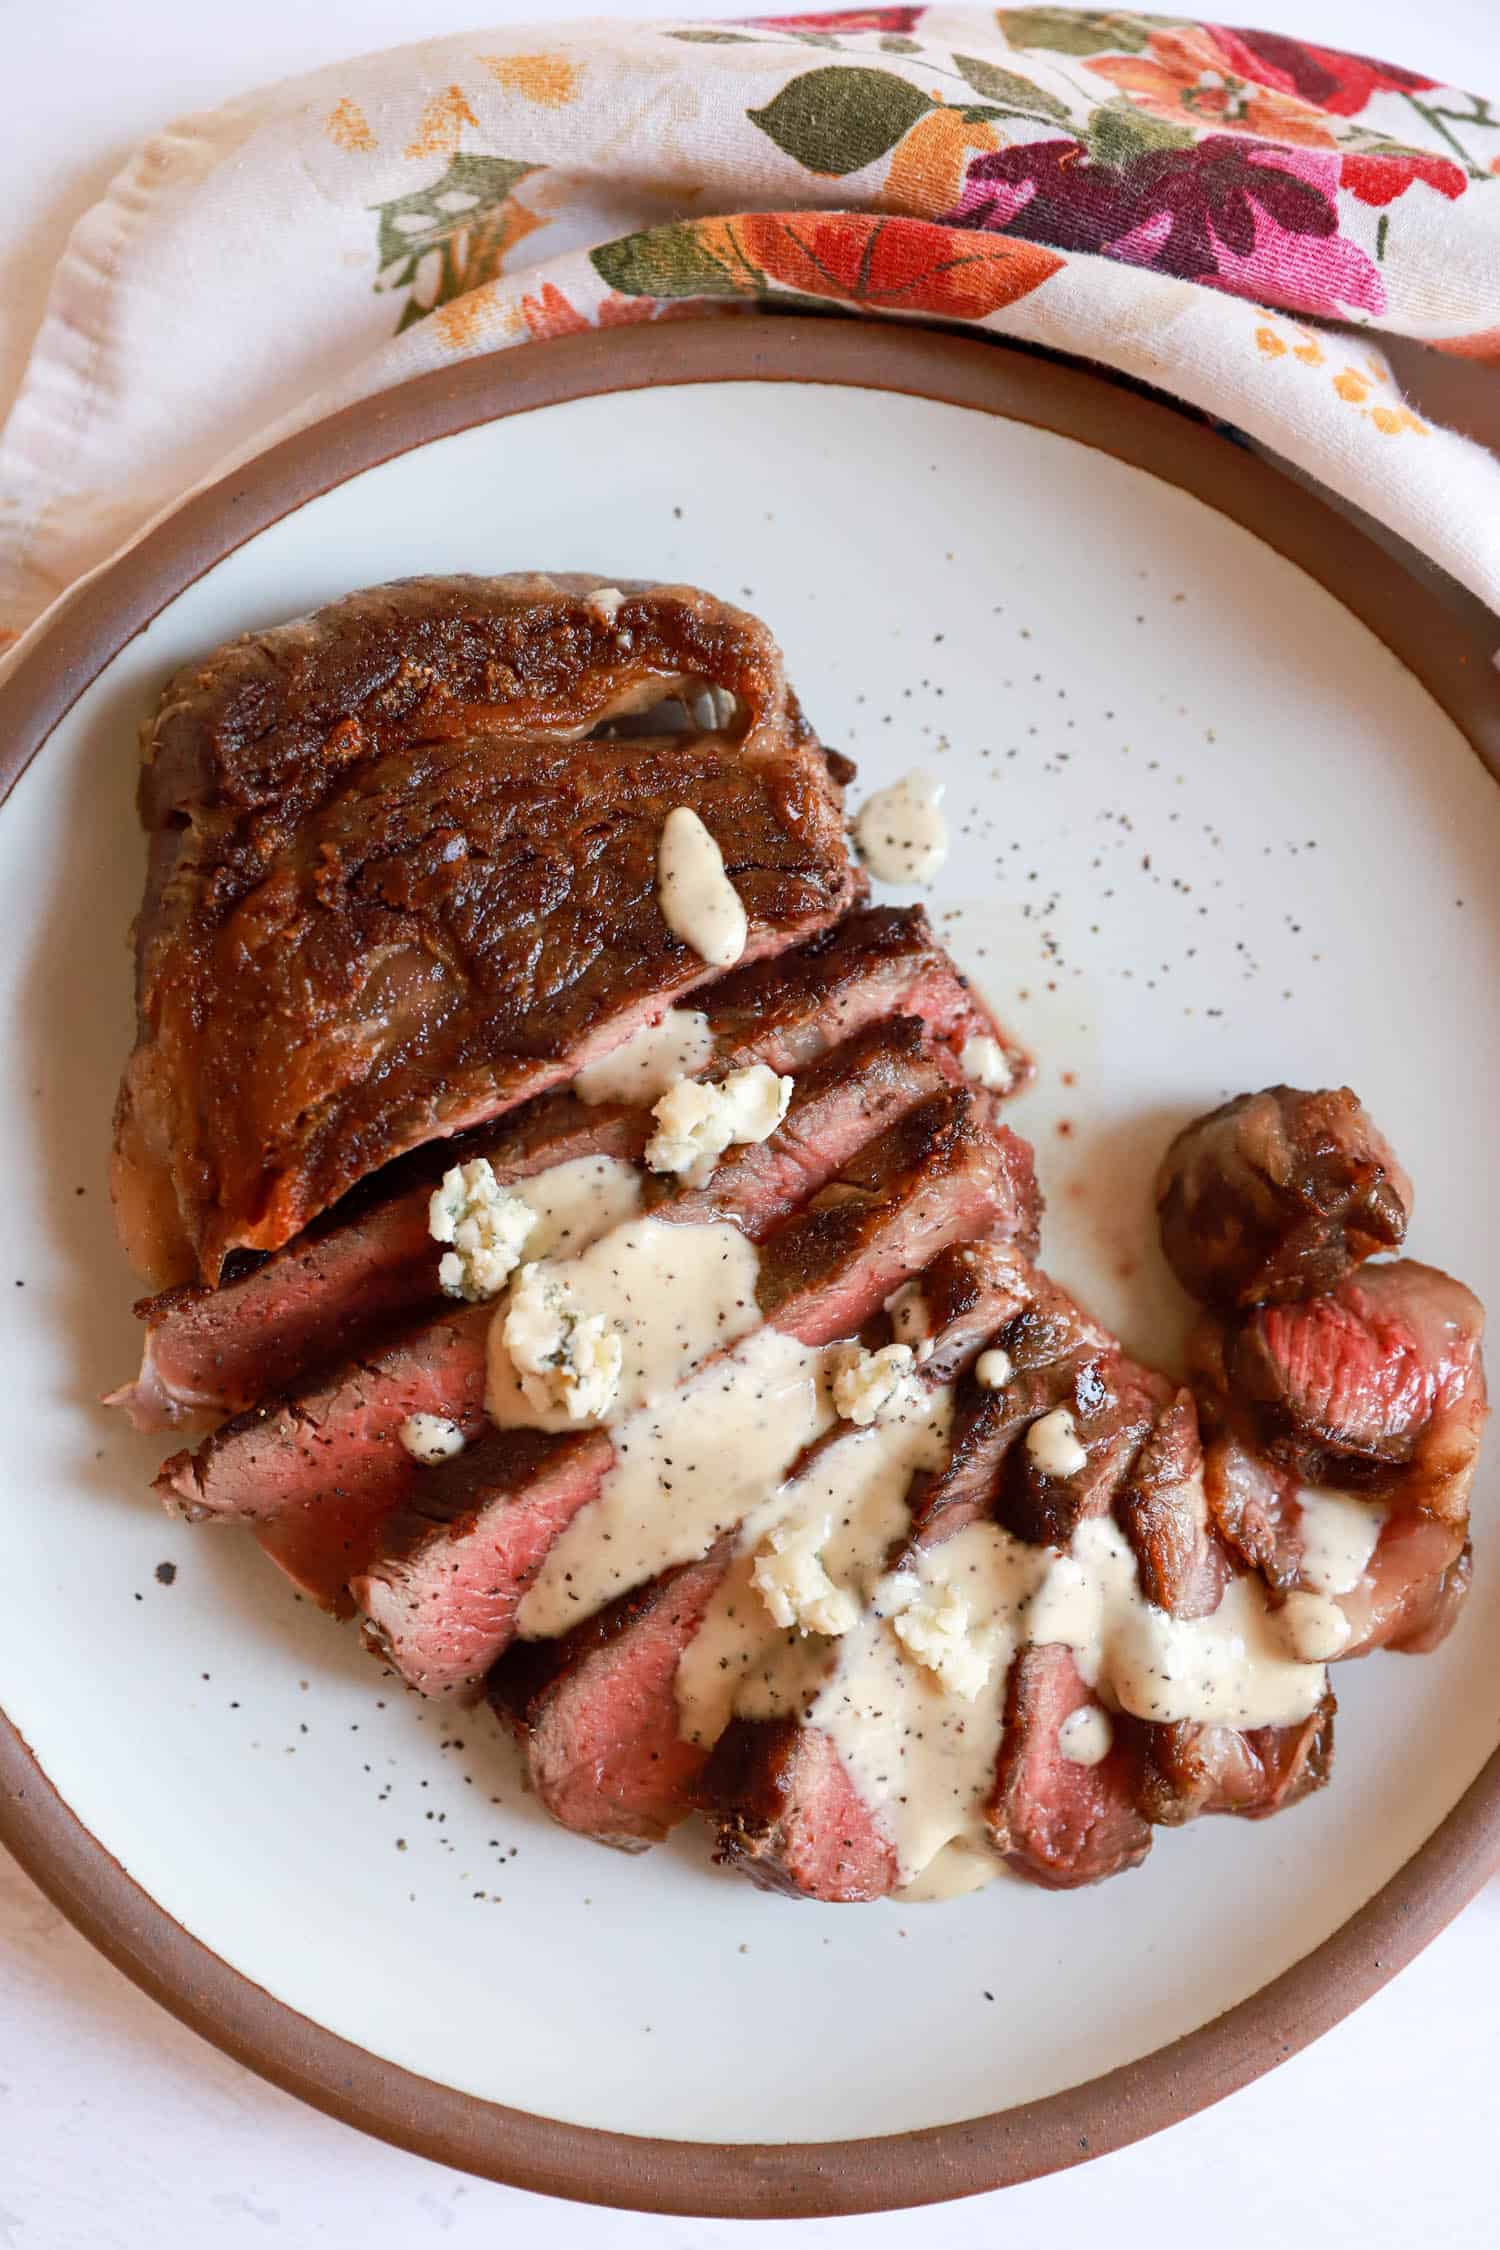 Round ceramic plate with sliced rare steak topped with gorgonzola sauce.